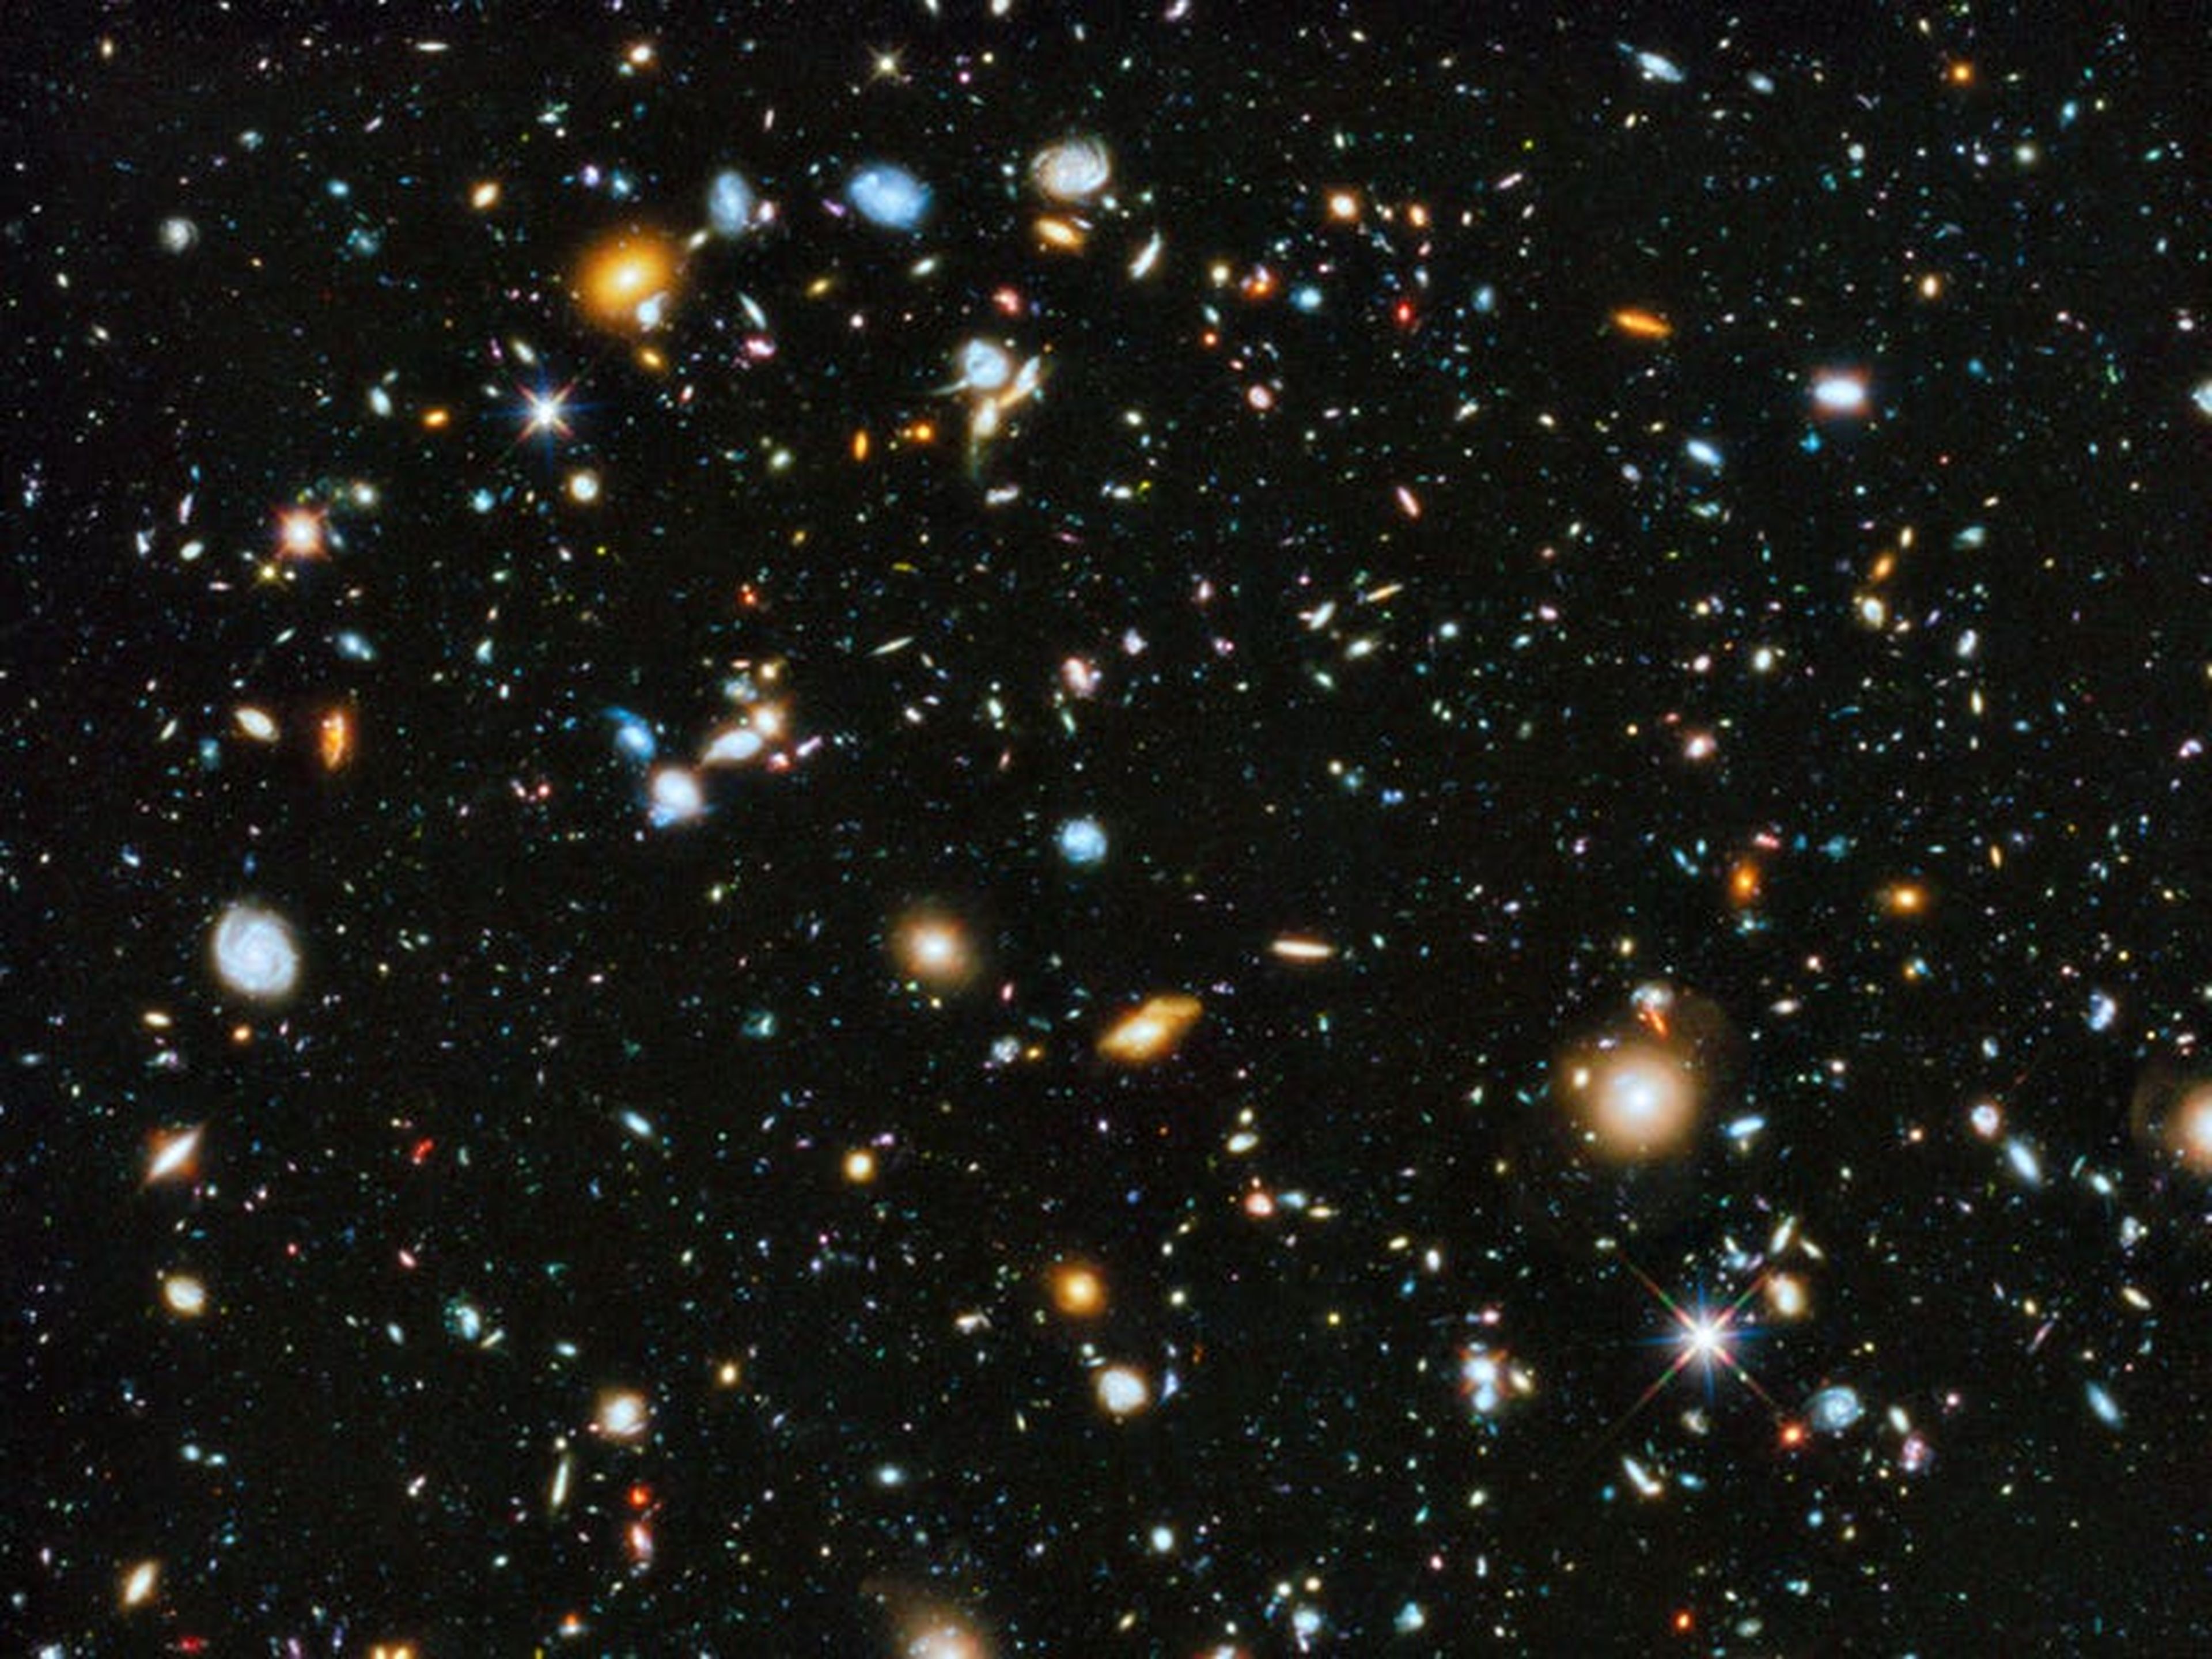 NASA's Hubble Space Telescope captured nearly 10,000 galaxies in this Ultra Deep Field image.